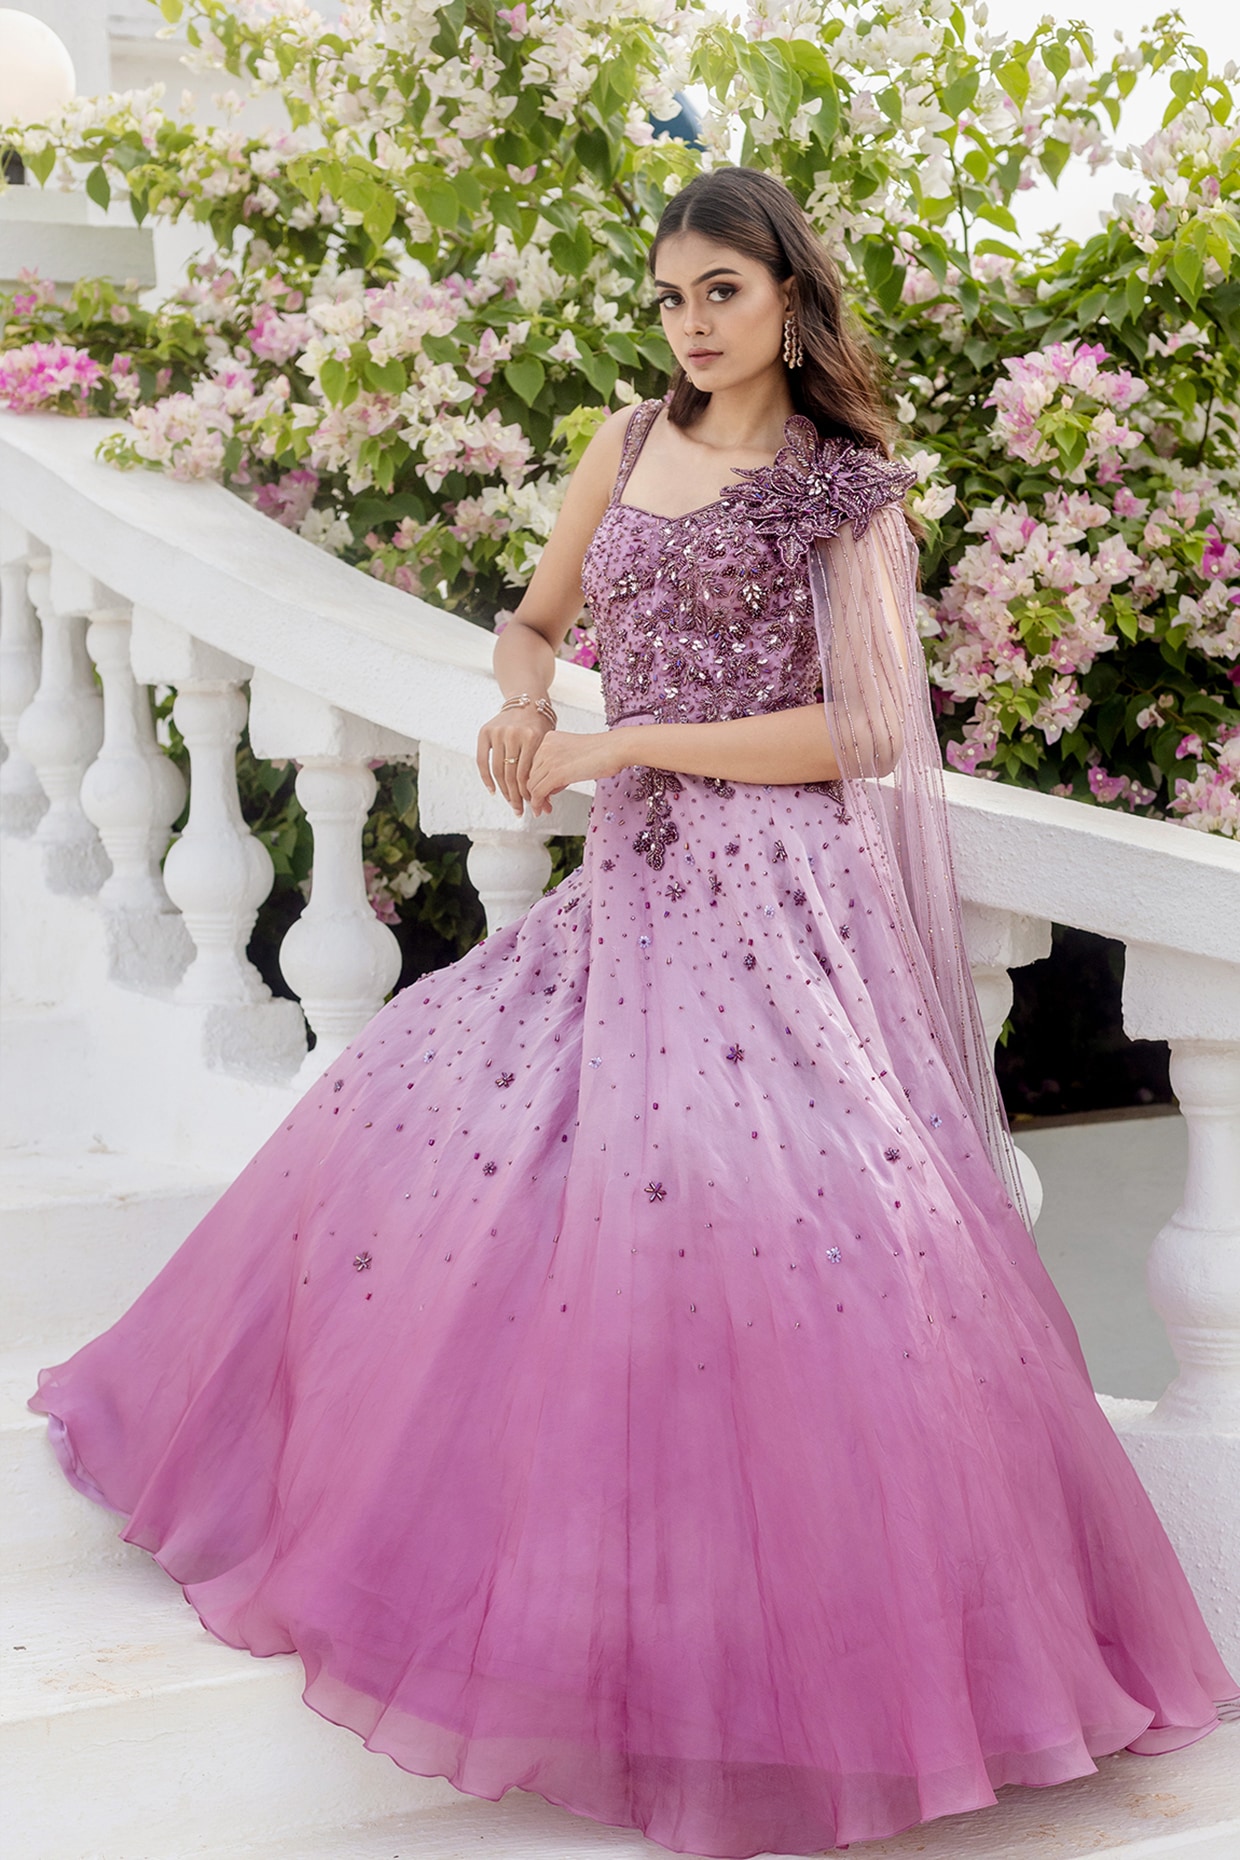 New) Indian Evening Gowns For Wedding Reception With Price